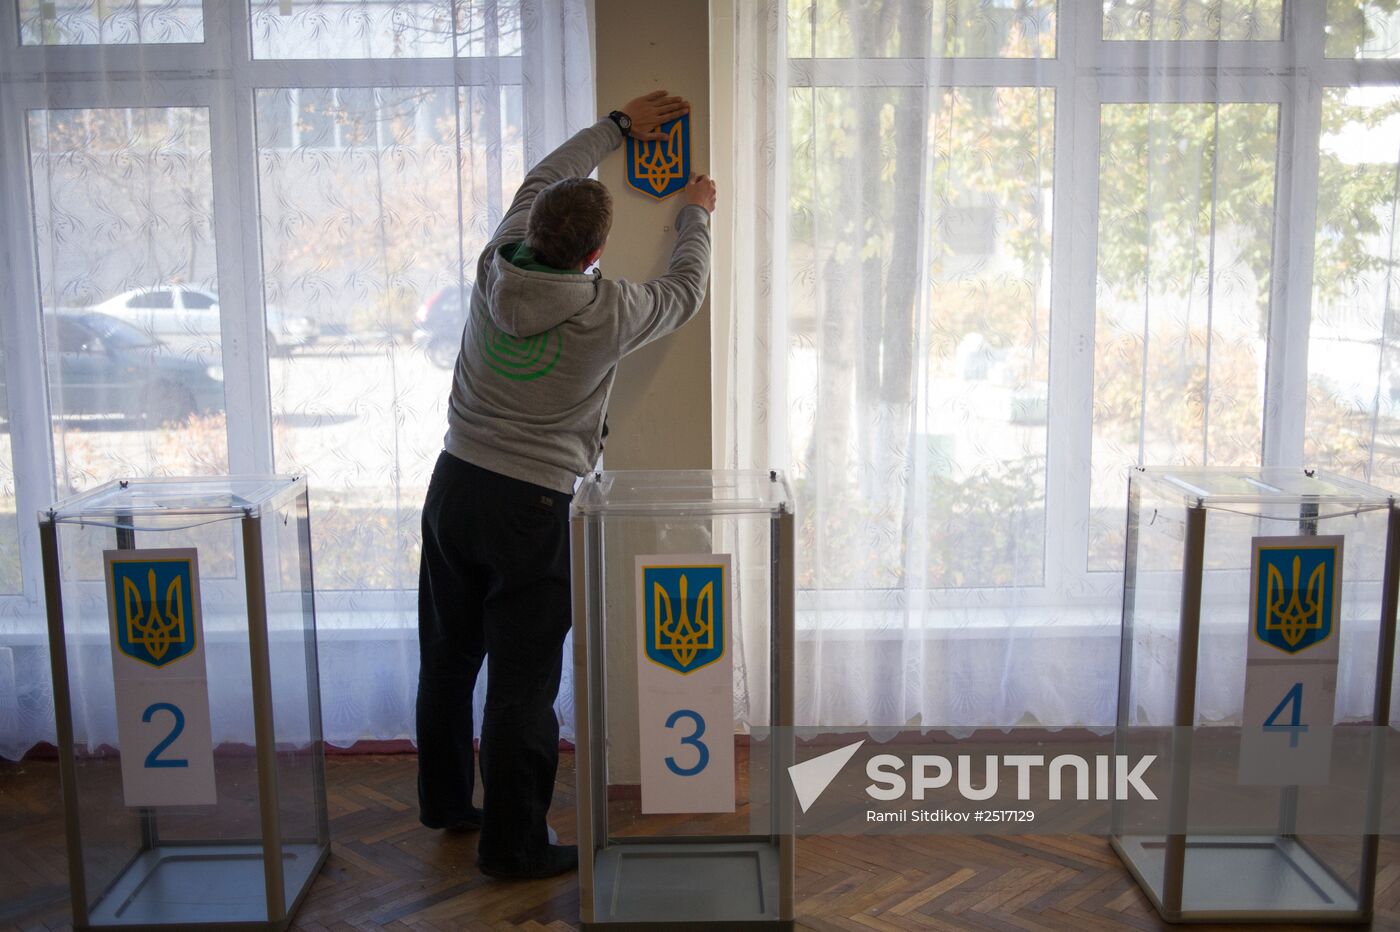 Ukraine on the eve of parliamentary election